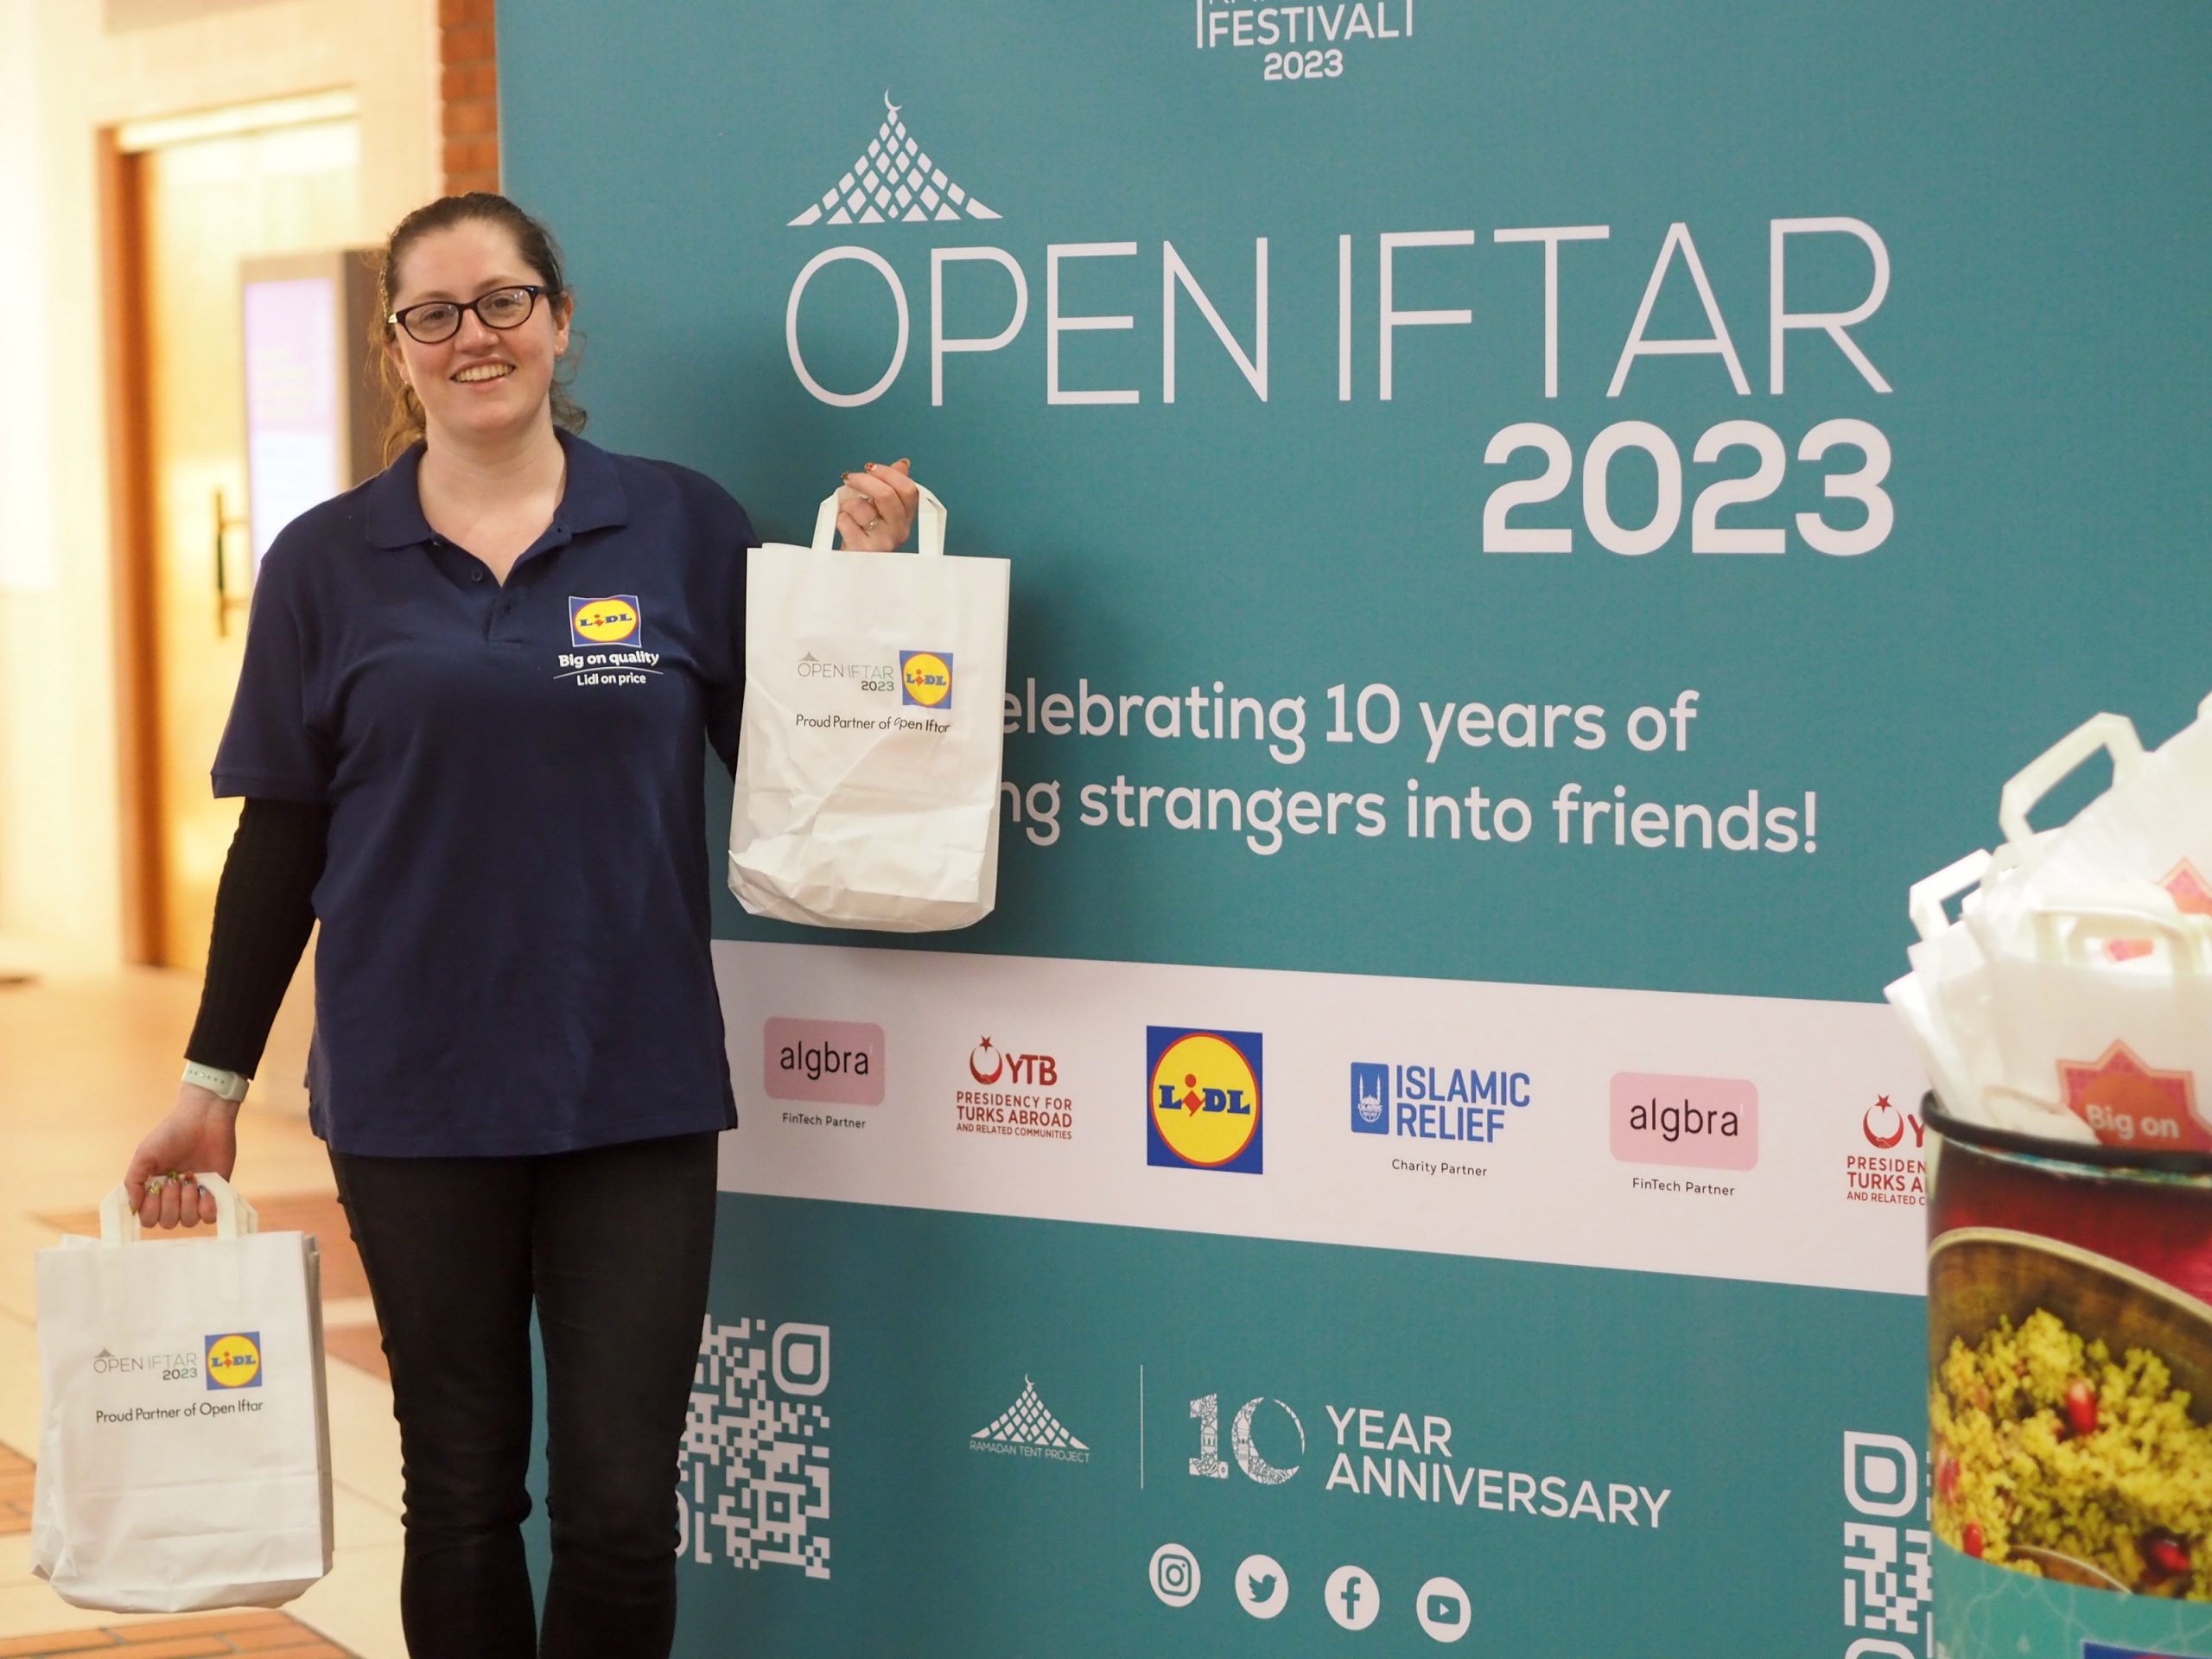 British Library Hosts Open Public Iftar - About Islam